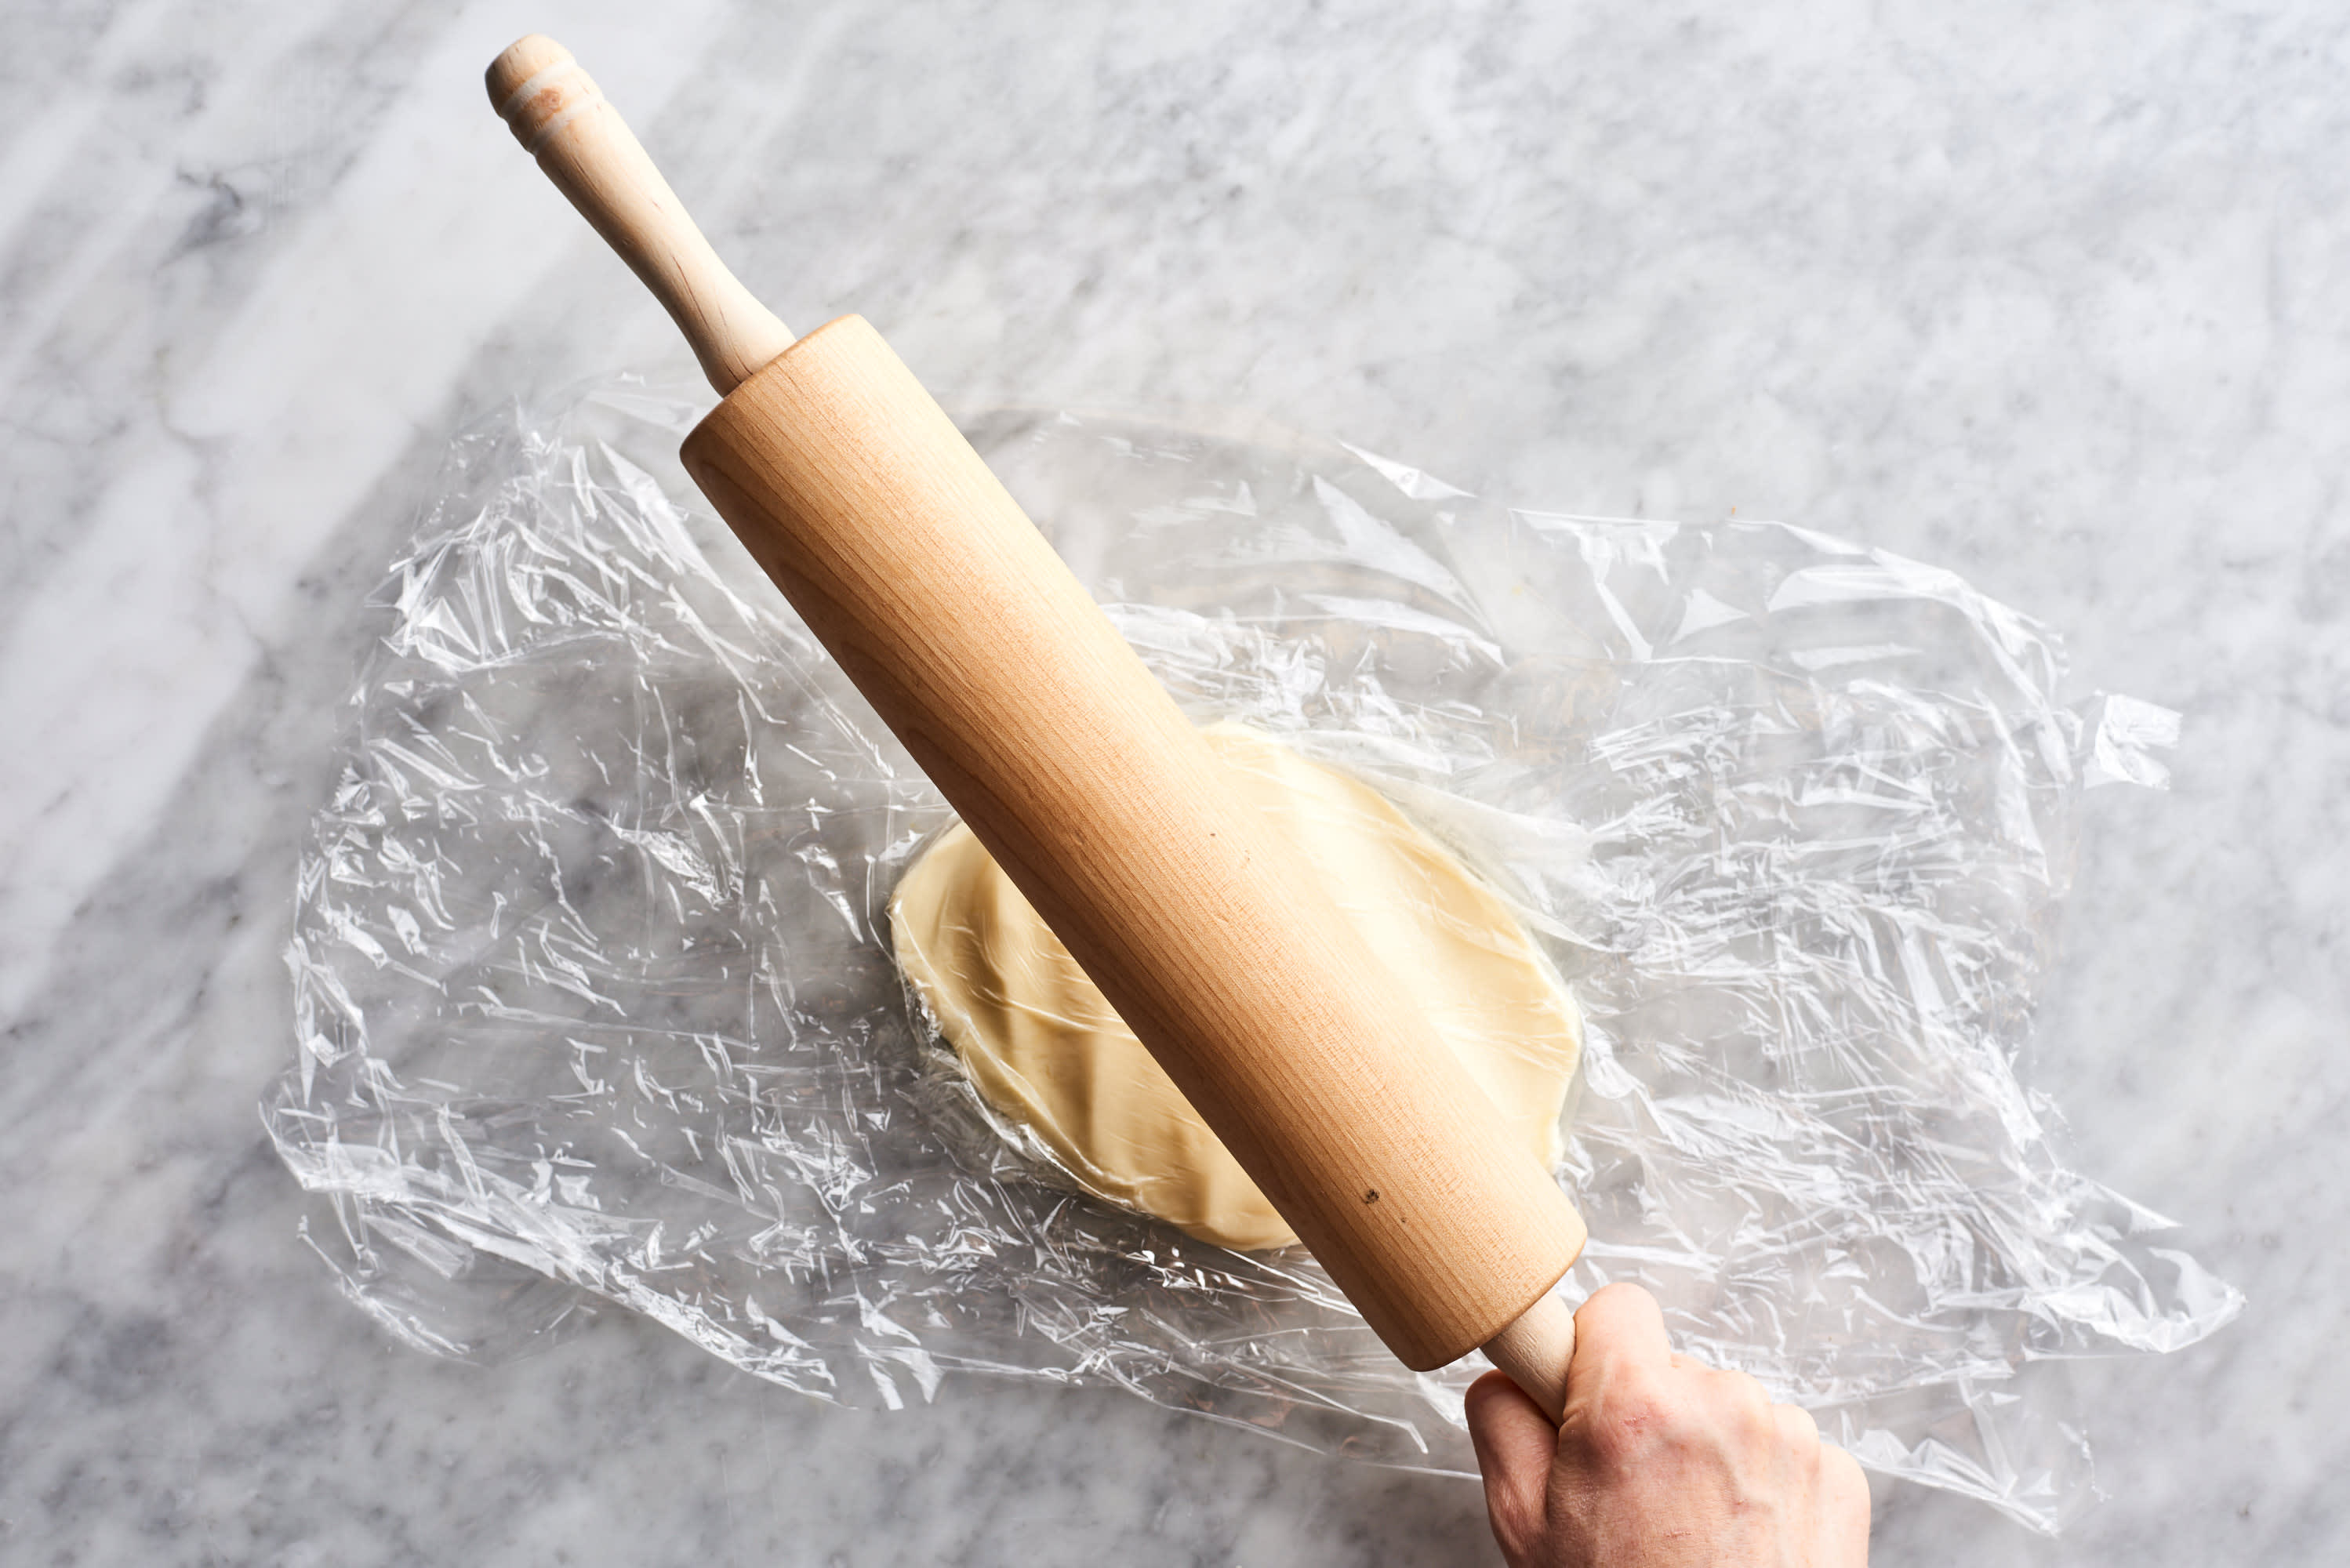 10 Baking Tools to Make You a Better Baker